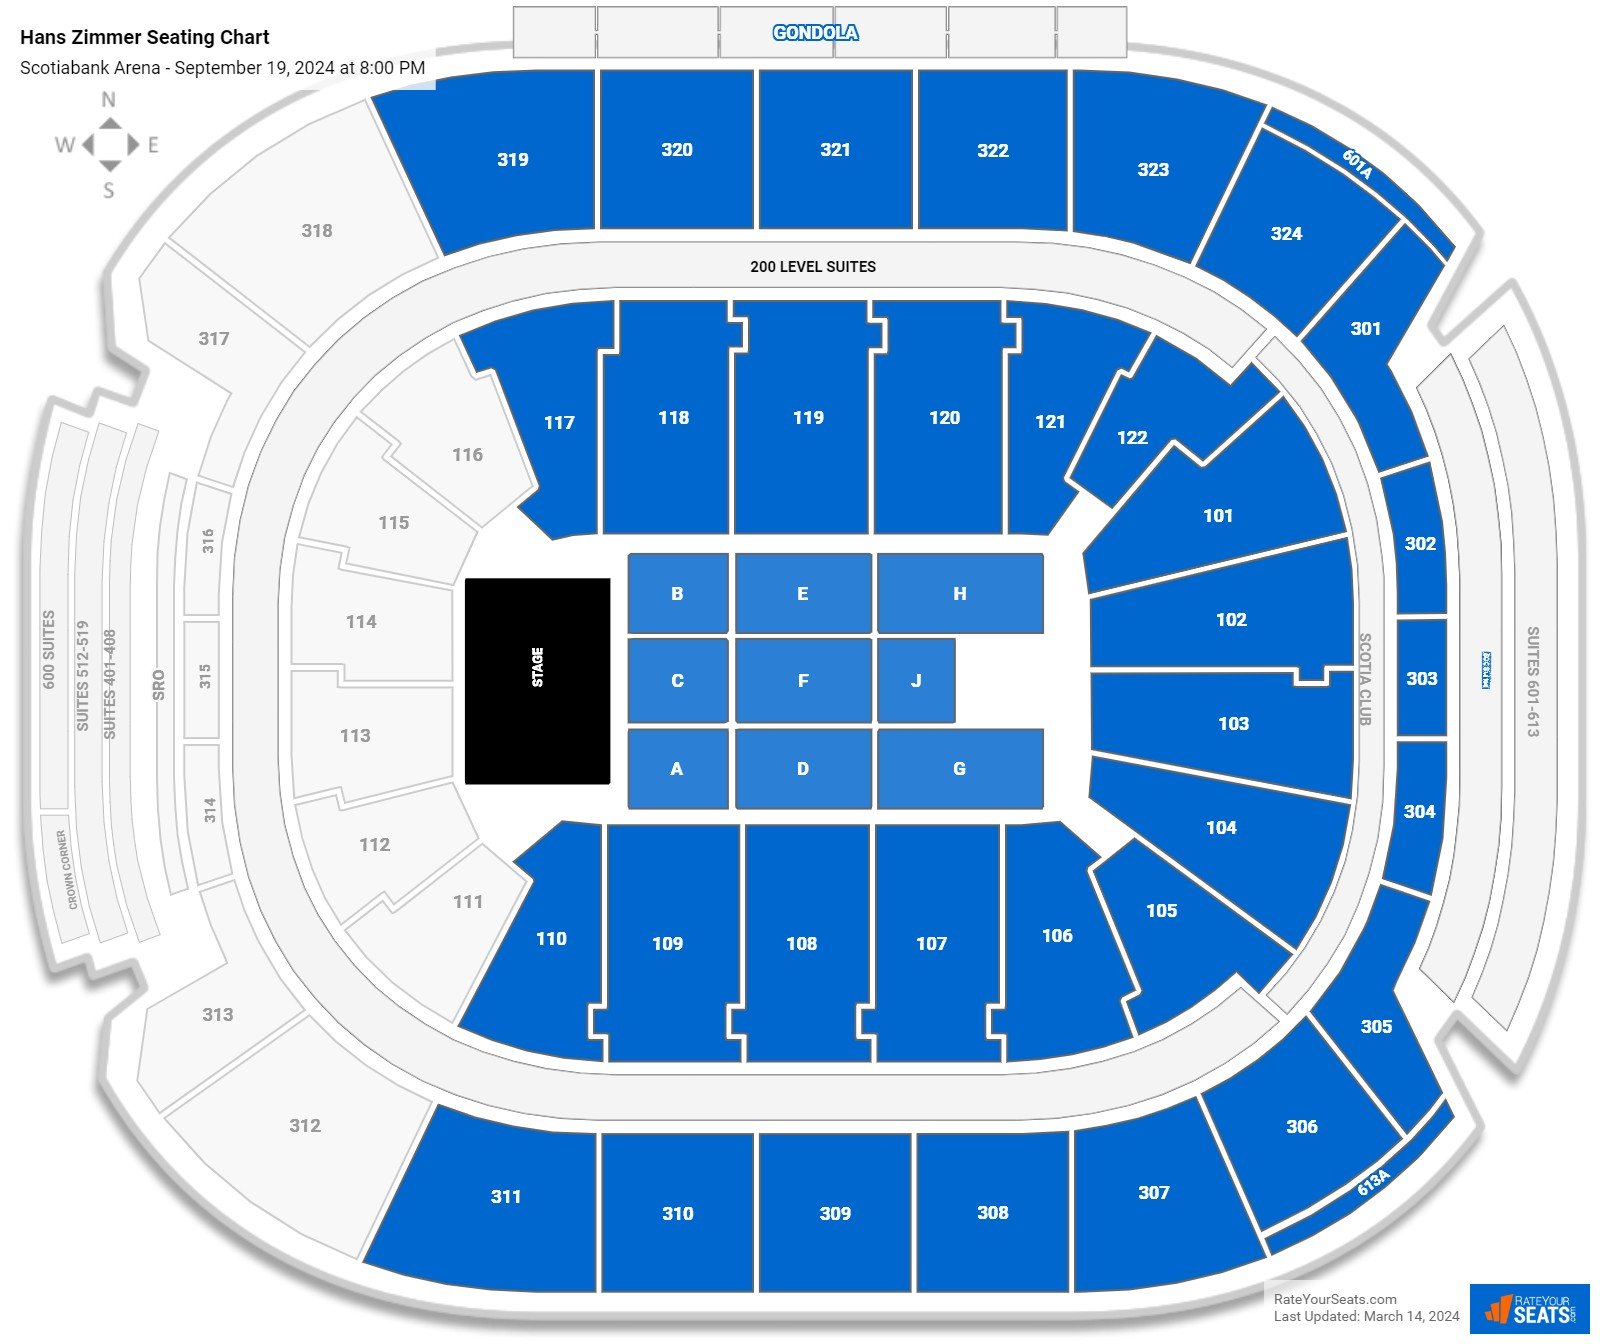 Hans Zimmer seating chart Scotiabank Arena